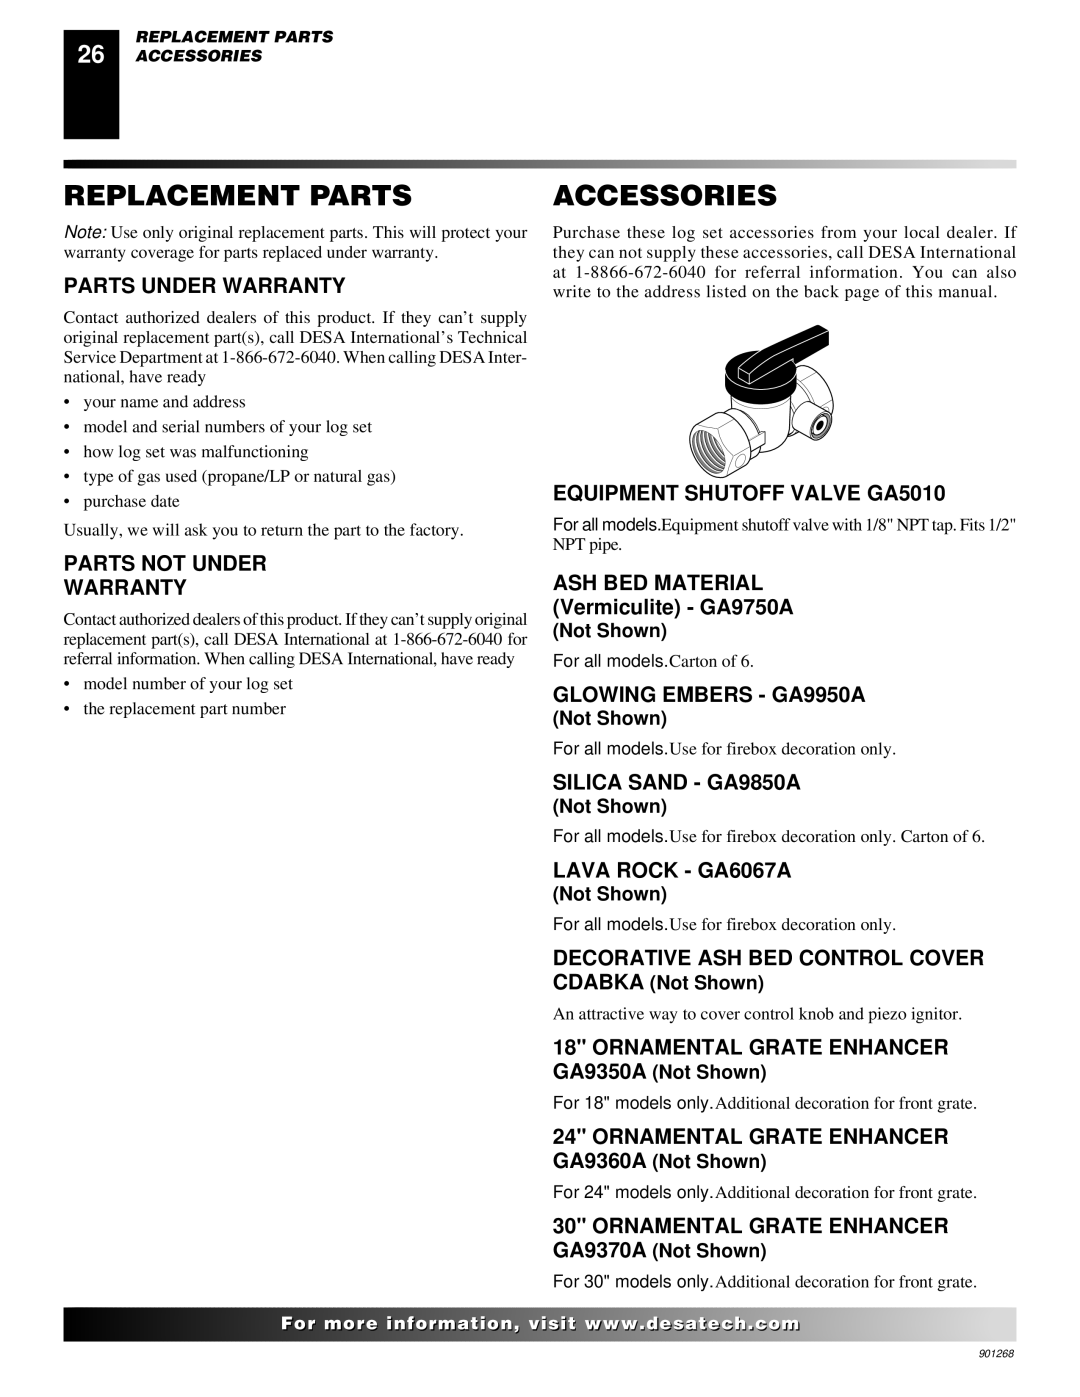 Desa VVDA24M, VVSA24M, VVDA18M, VVDA30M, VVSA18M installation manual Replacement Parts, Accessories 